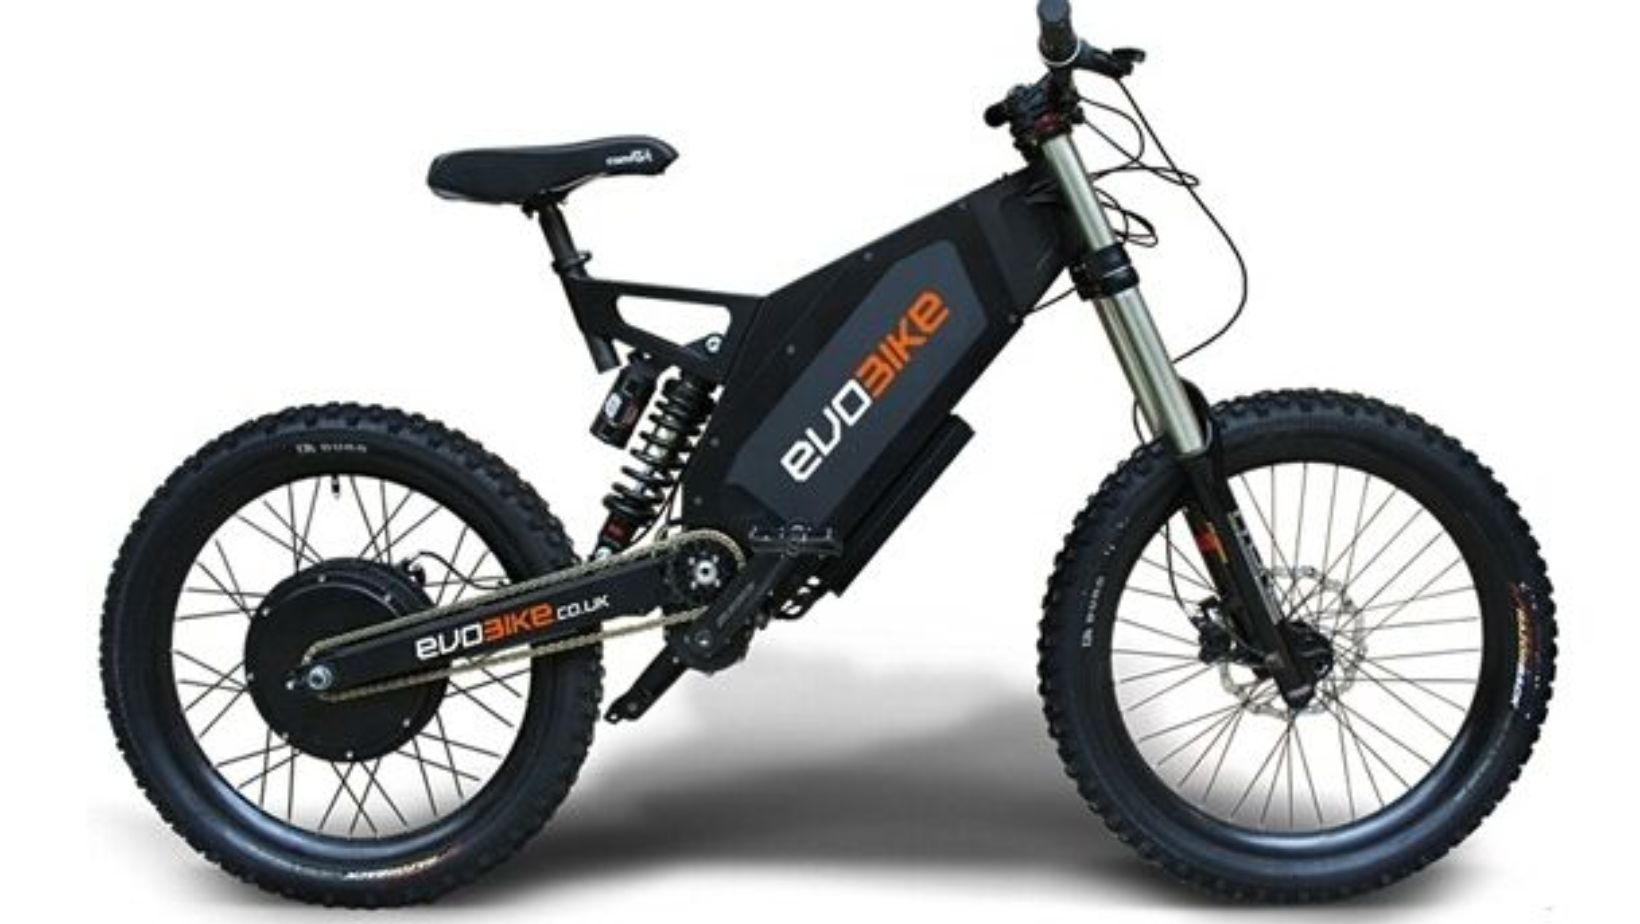 Amazing Features of 5000w Electric Bike You May Not Know